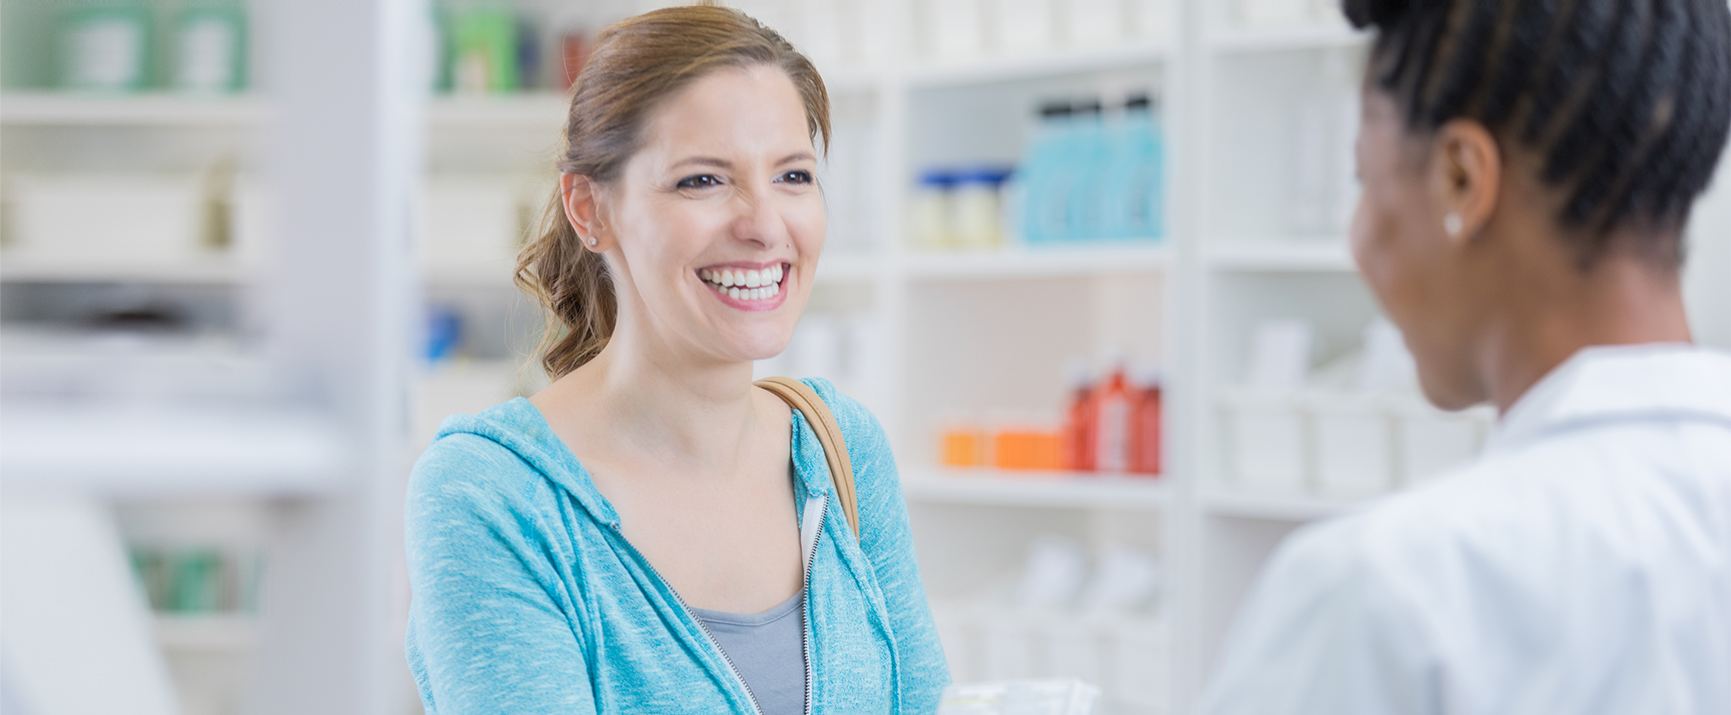 Temuka Pharmacy is your local pharmacy providing healthcare in the heart of the Temuka community